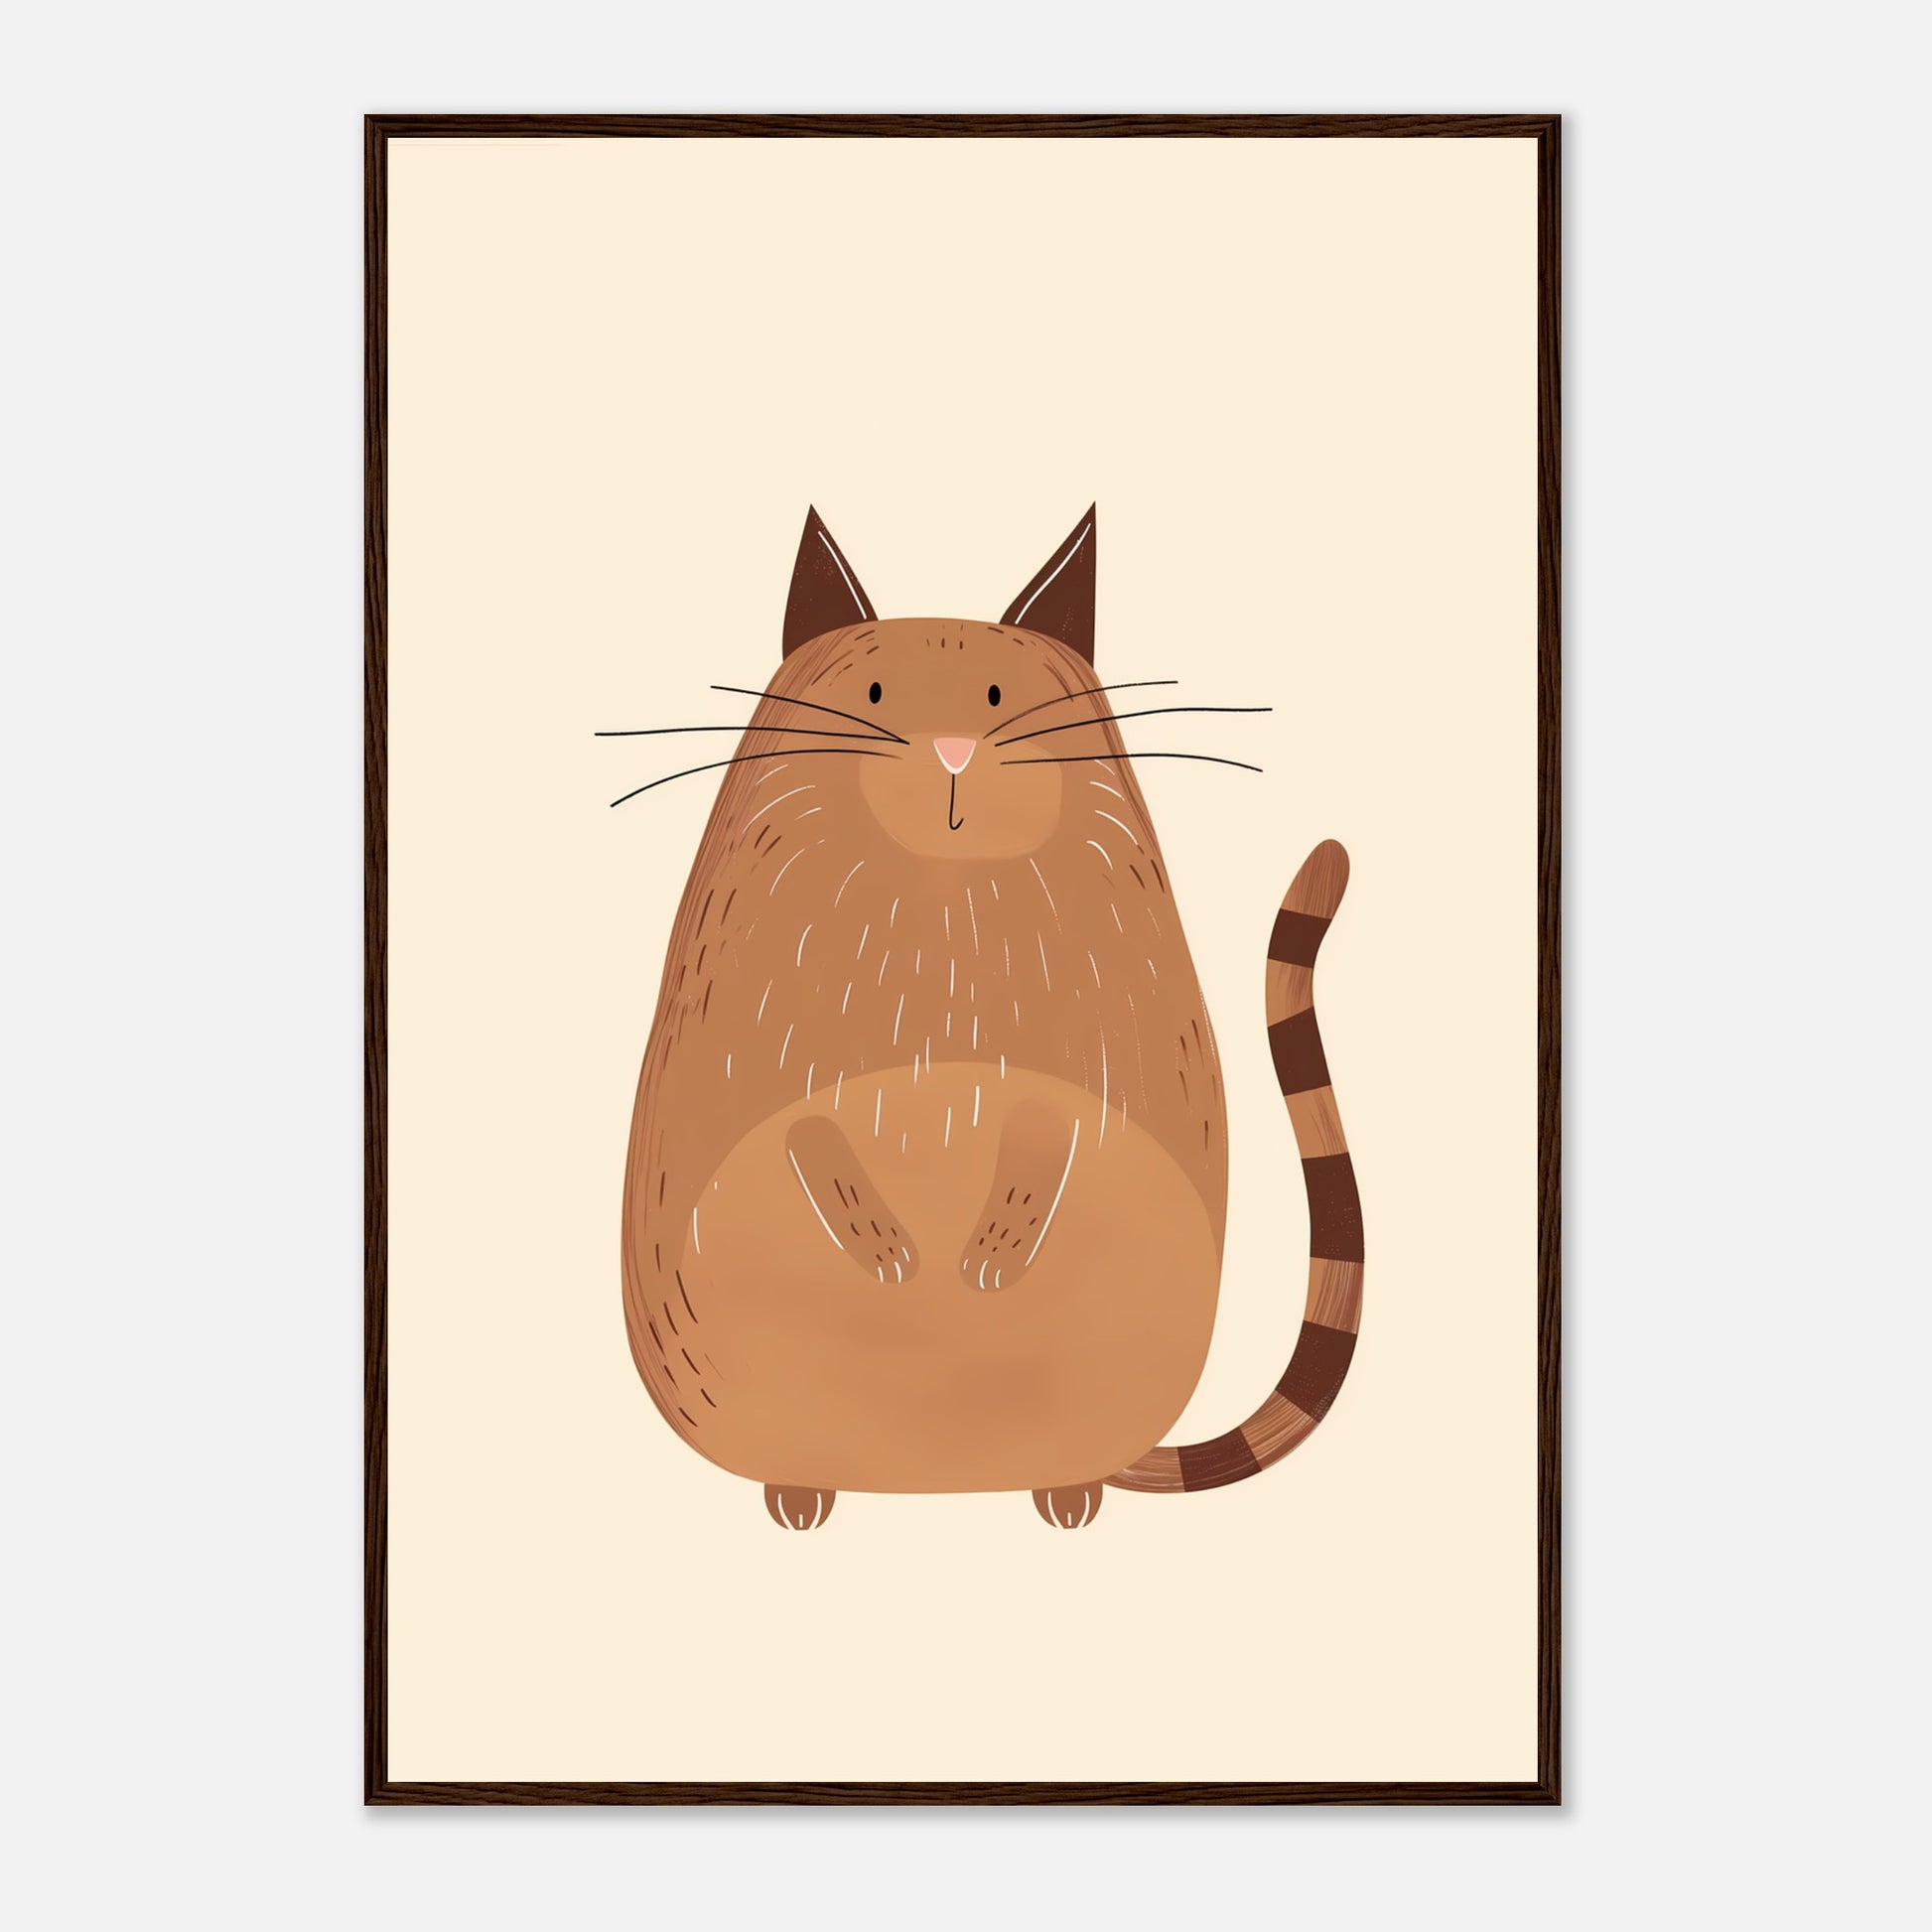 Illustration of a plump brown cat with stripes, hanging in a framed picture.